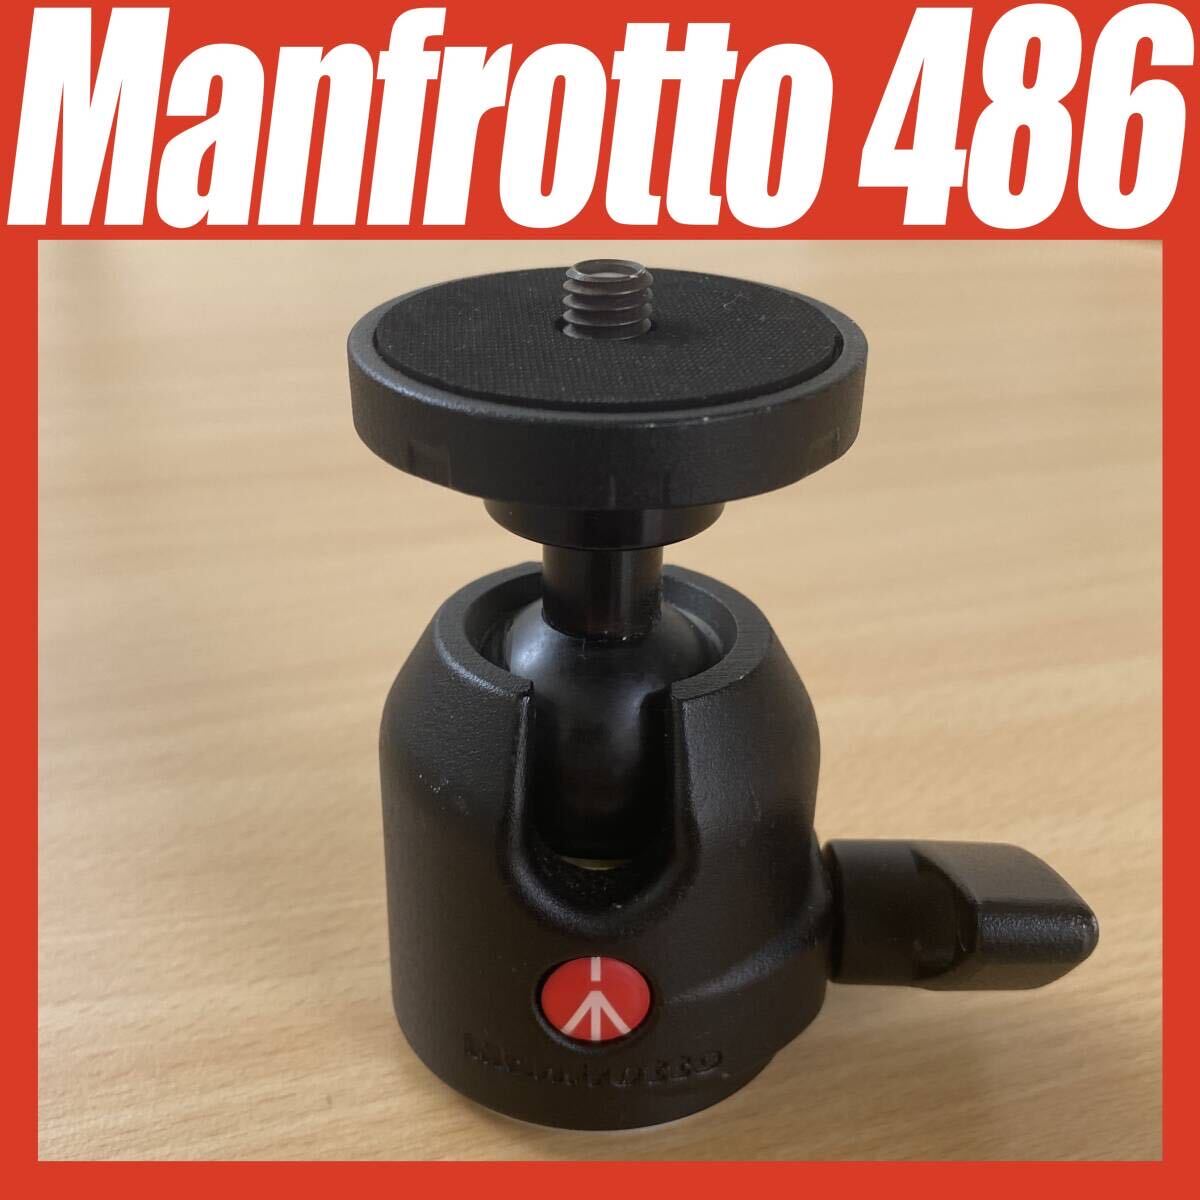 Manfrotto #486 コンパクトボールヘッド 自由雲台 Made In Italy_画像1